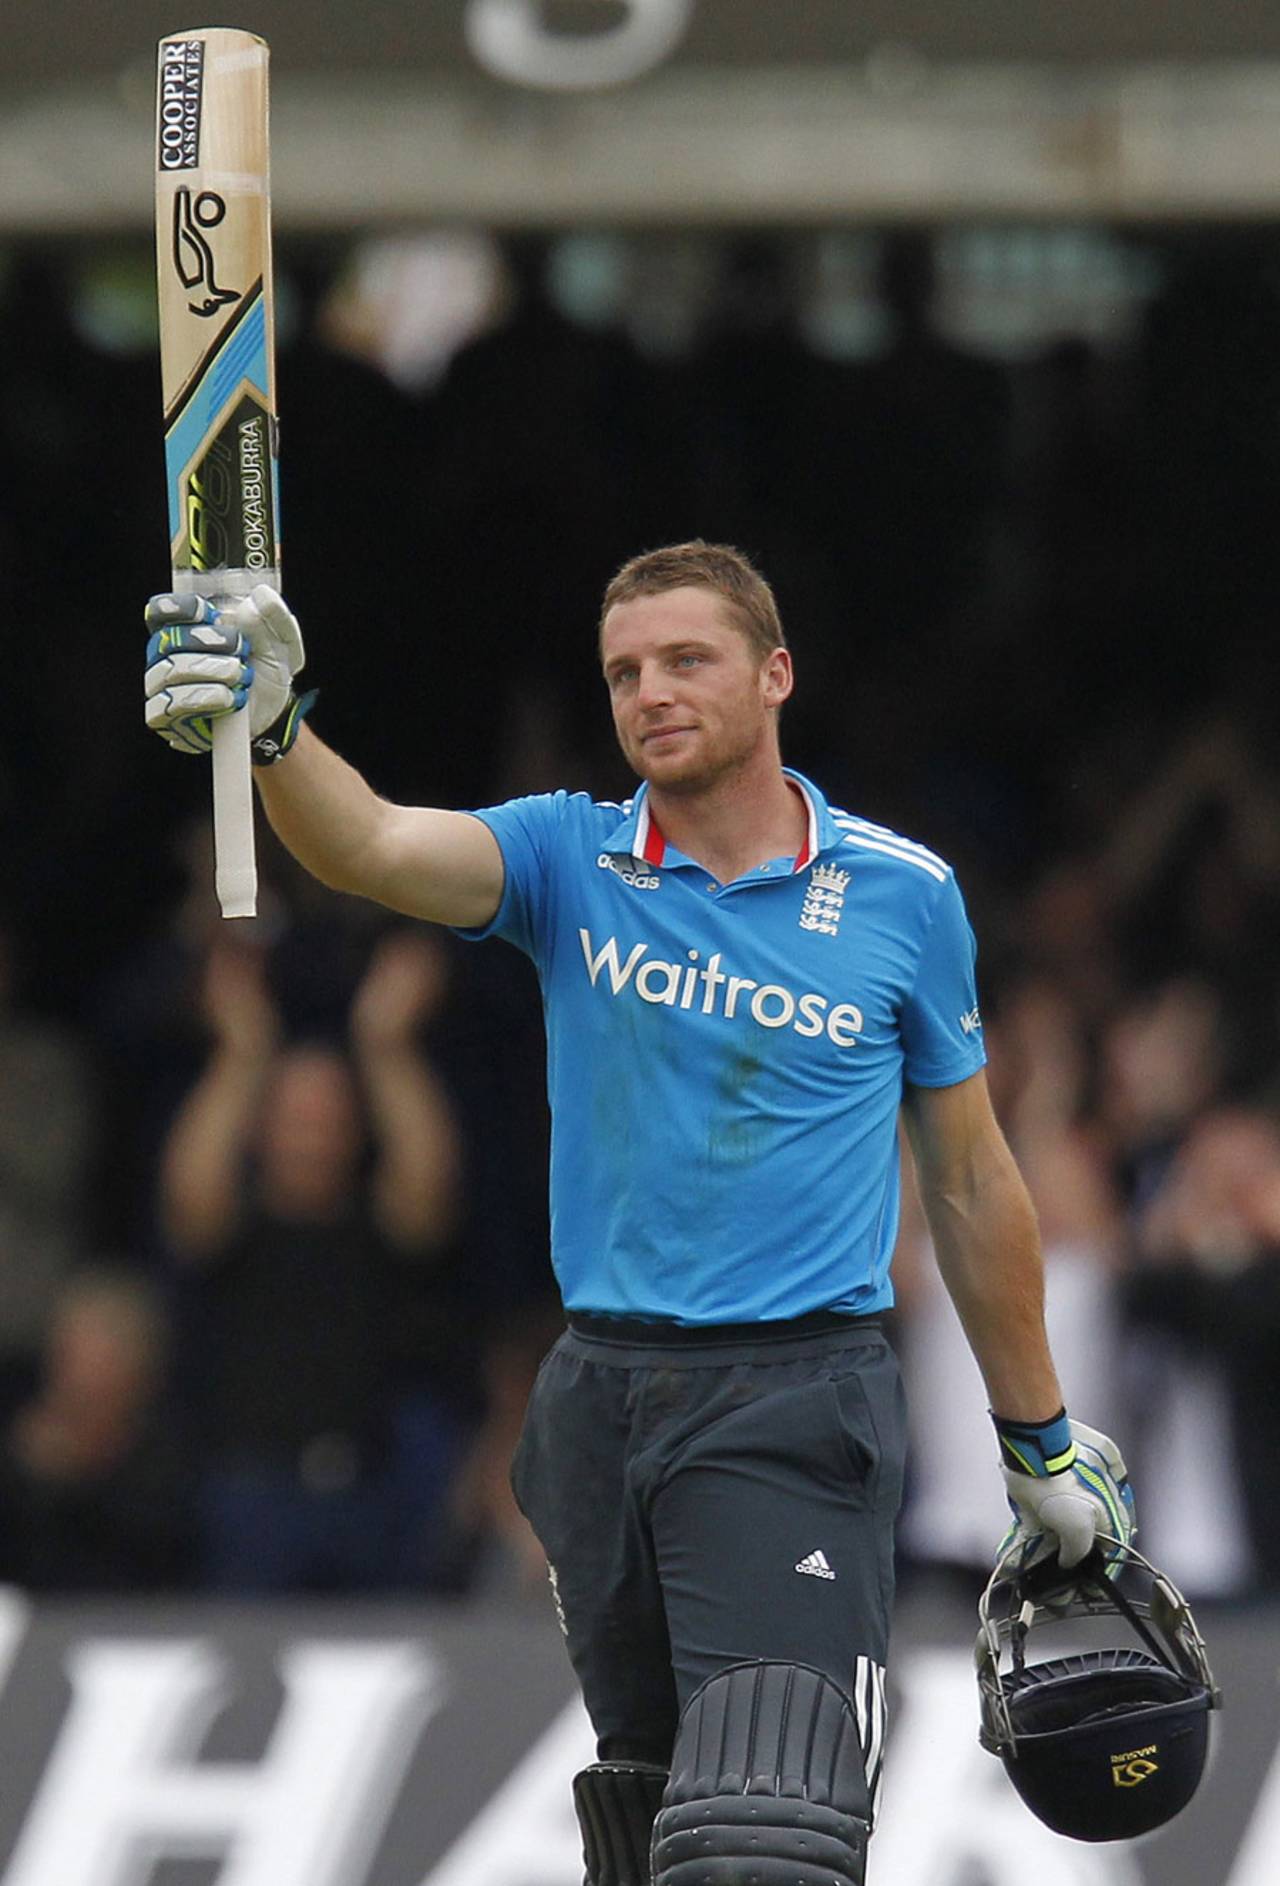 Jos Buttler reached a century off 61 balls, the fastest by an Englishman, England v Sri Lanka, 4th ODI, Lord's, May 31, 2014